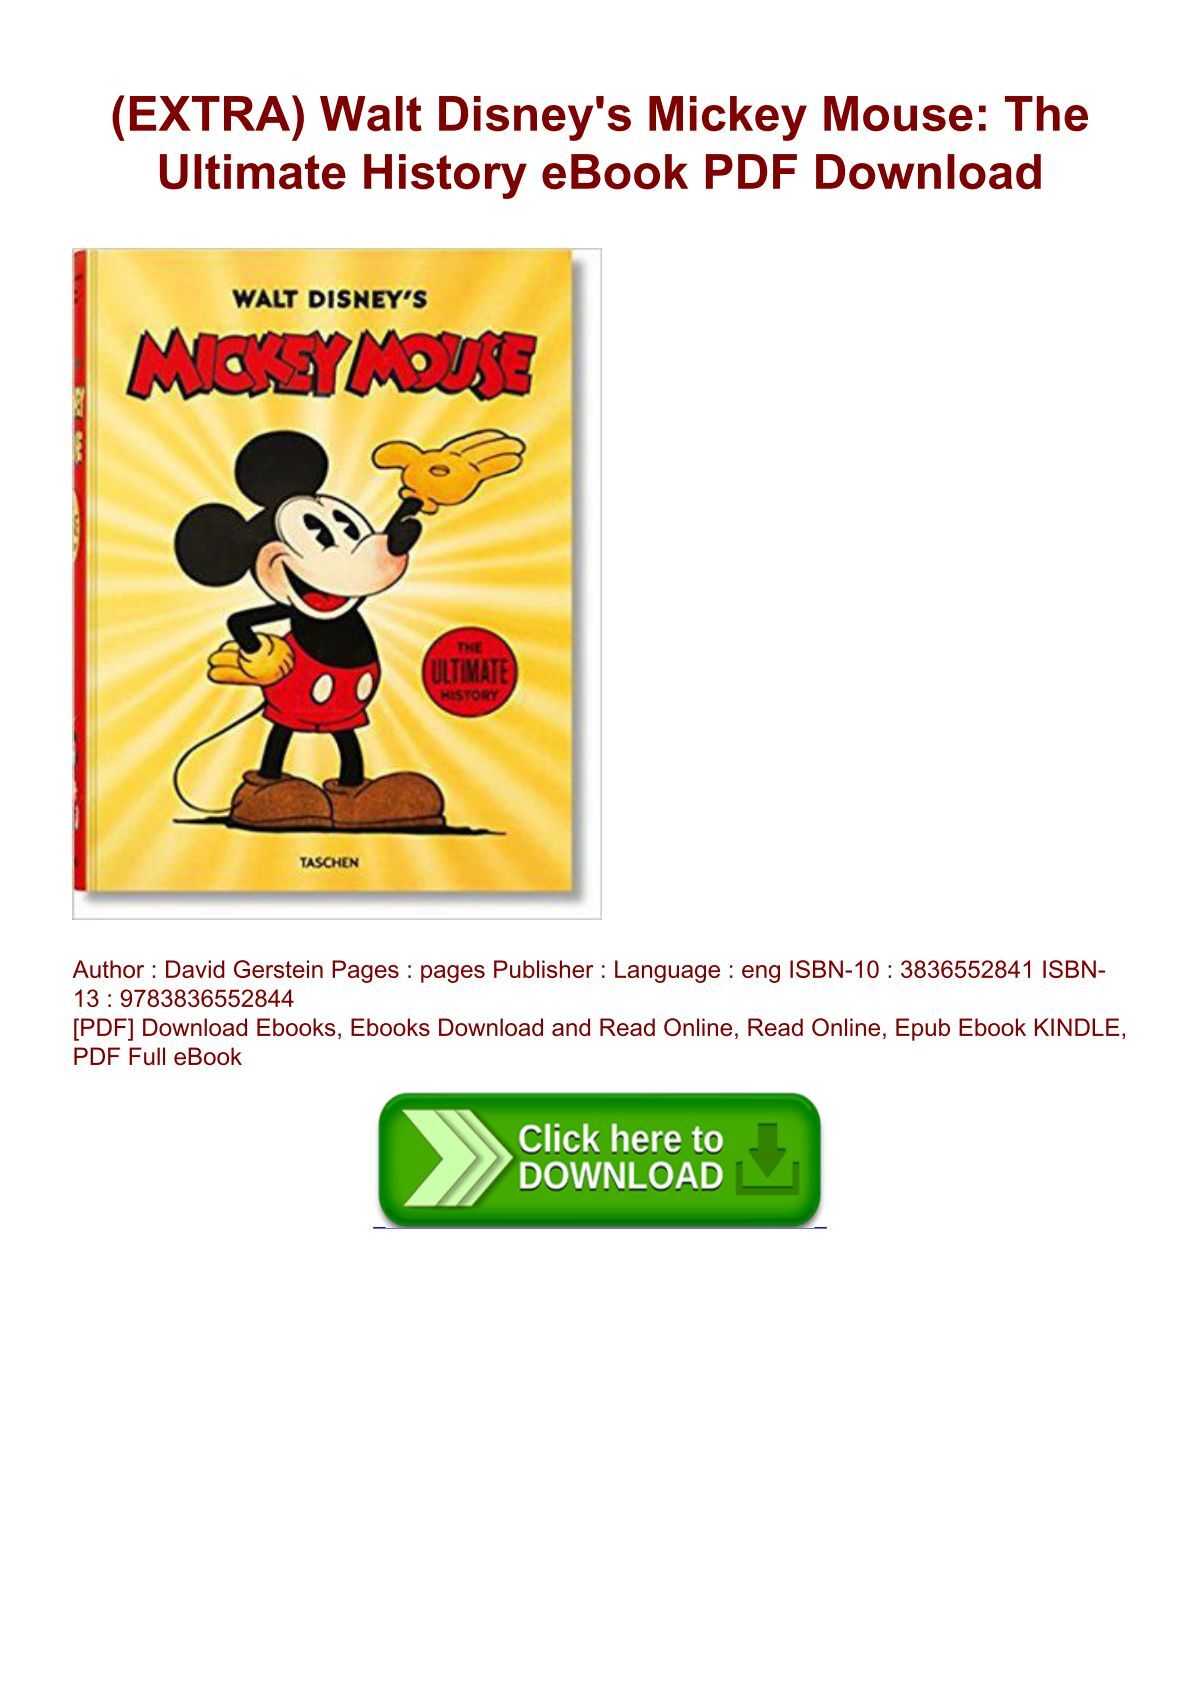 EXTRA) Walt Disney's Mickey Mouse: The Ultimate History eBook PDF